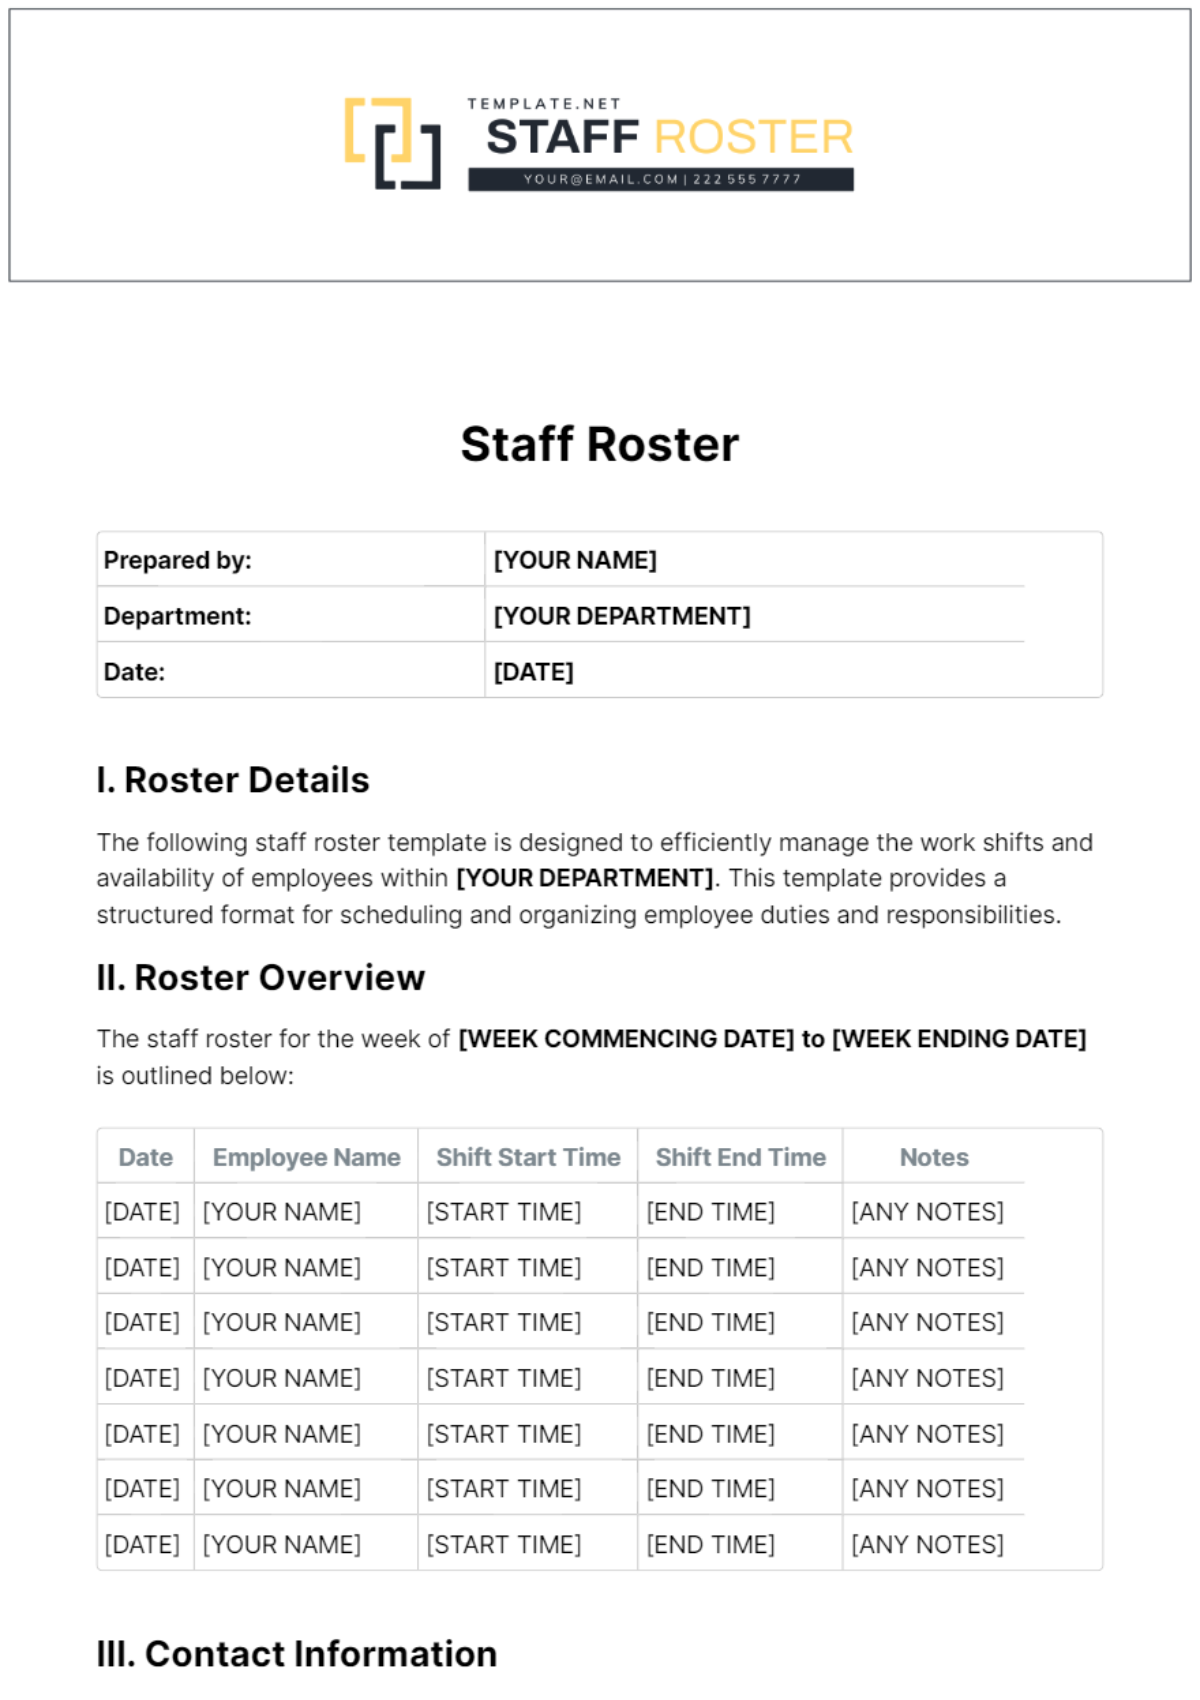 Staff Roster Template